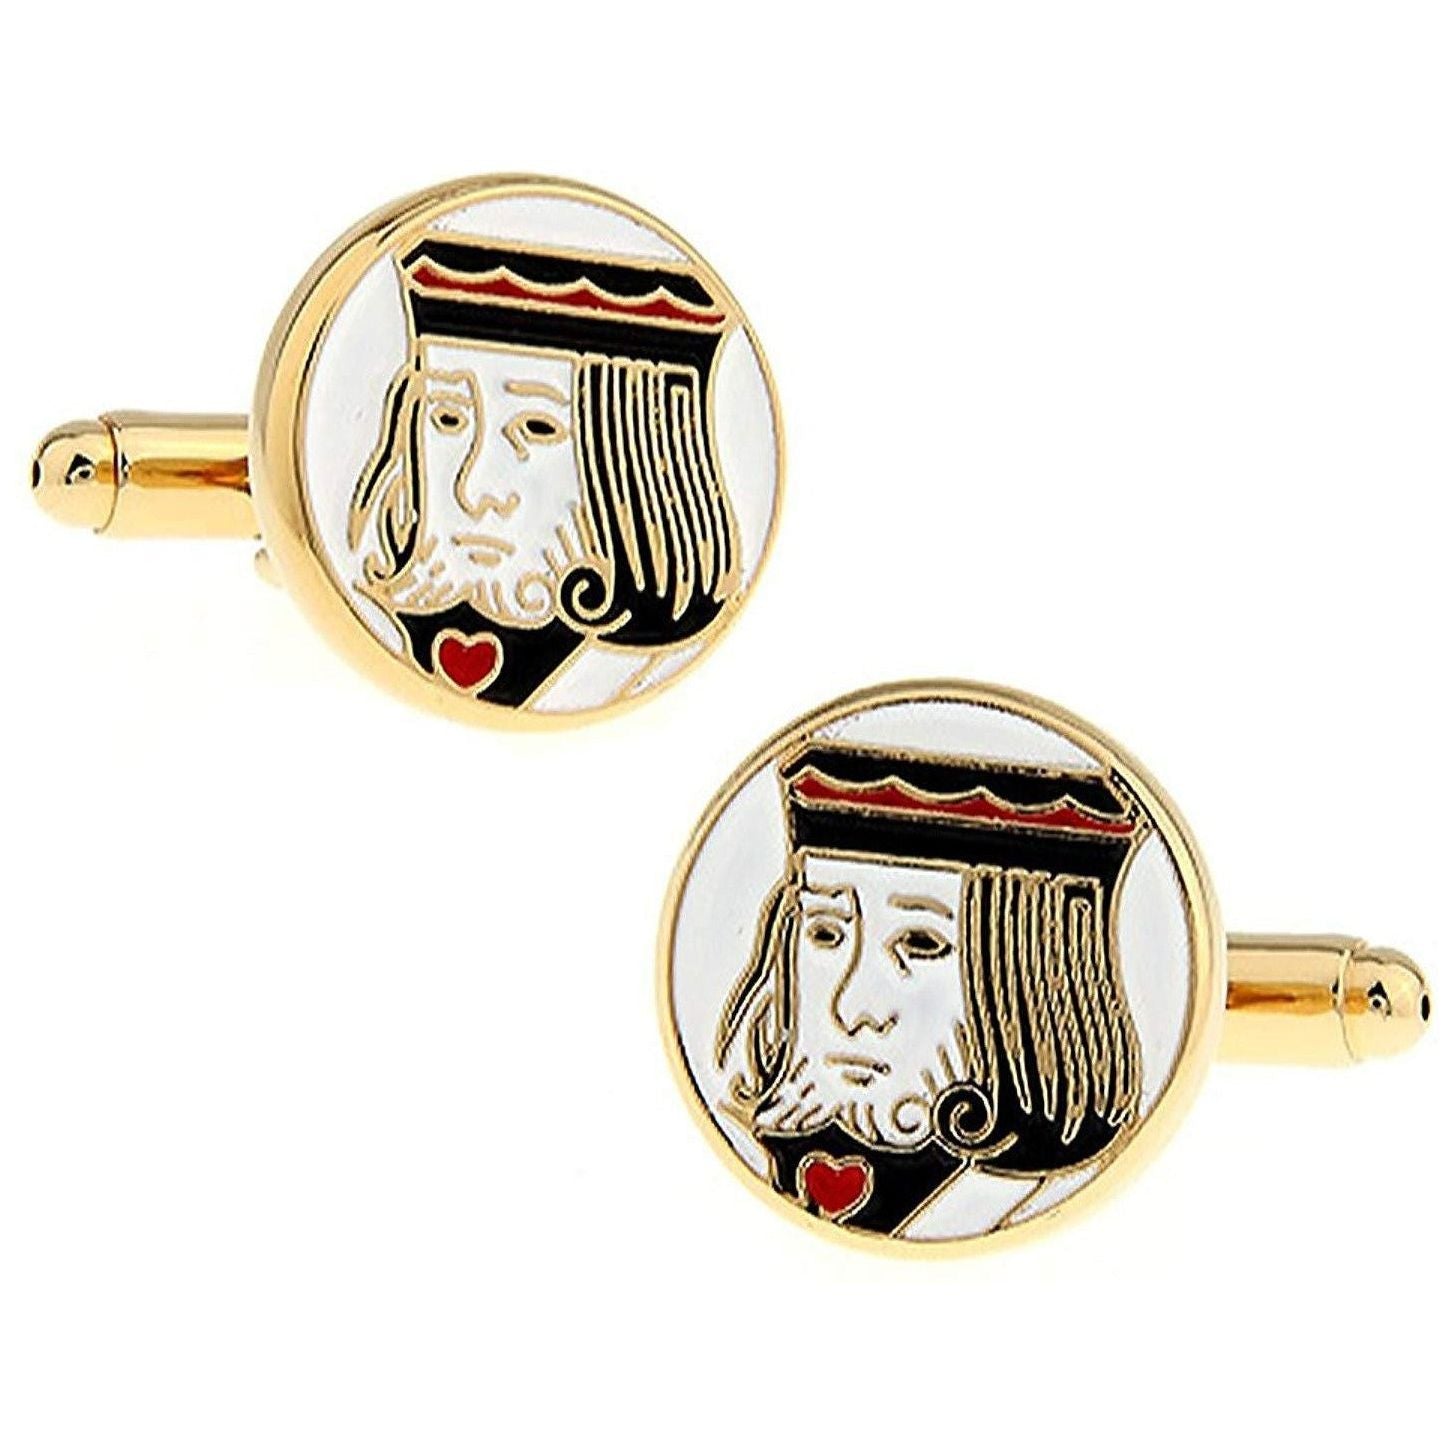 Gold King of Hearts Cufflinks - Ashton and Finch